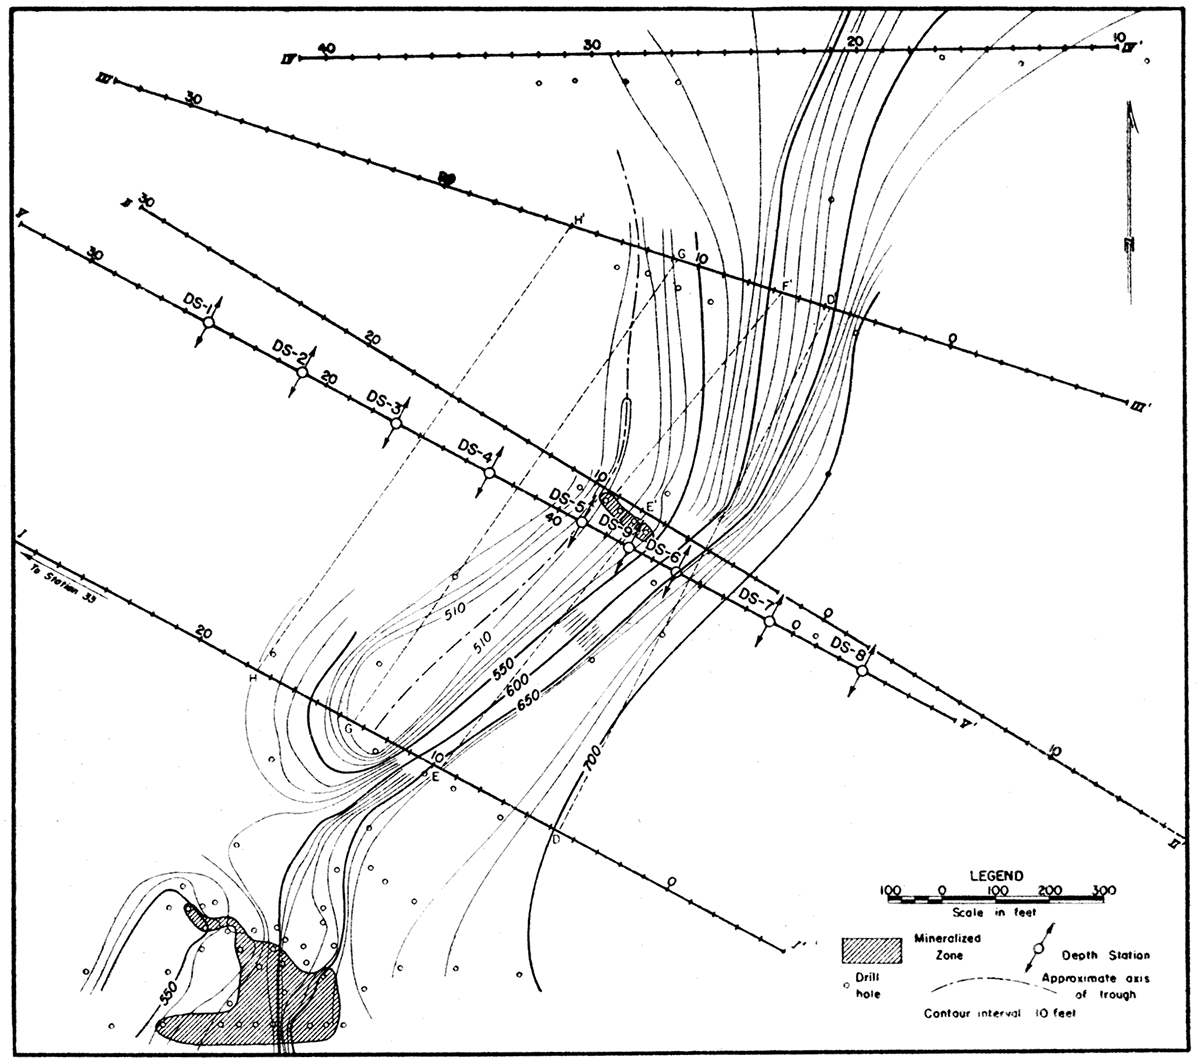 Map showing contours on the top of the limestone, mineralized zones, and traverse lines in the Mullen area.